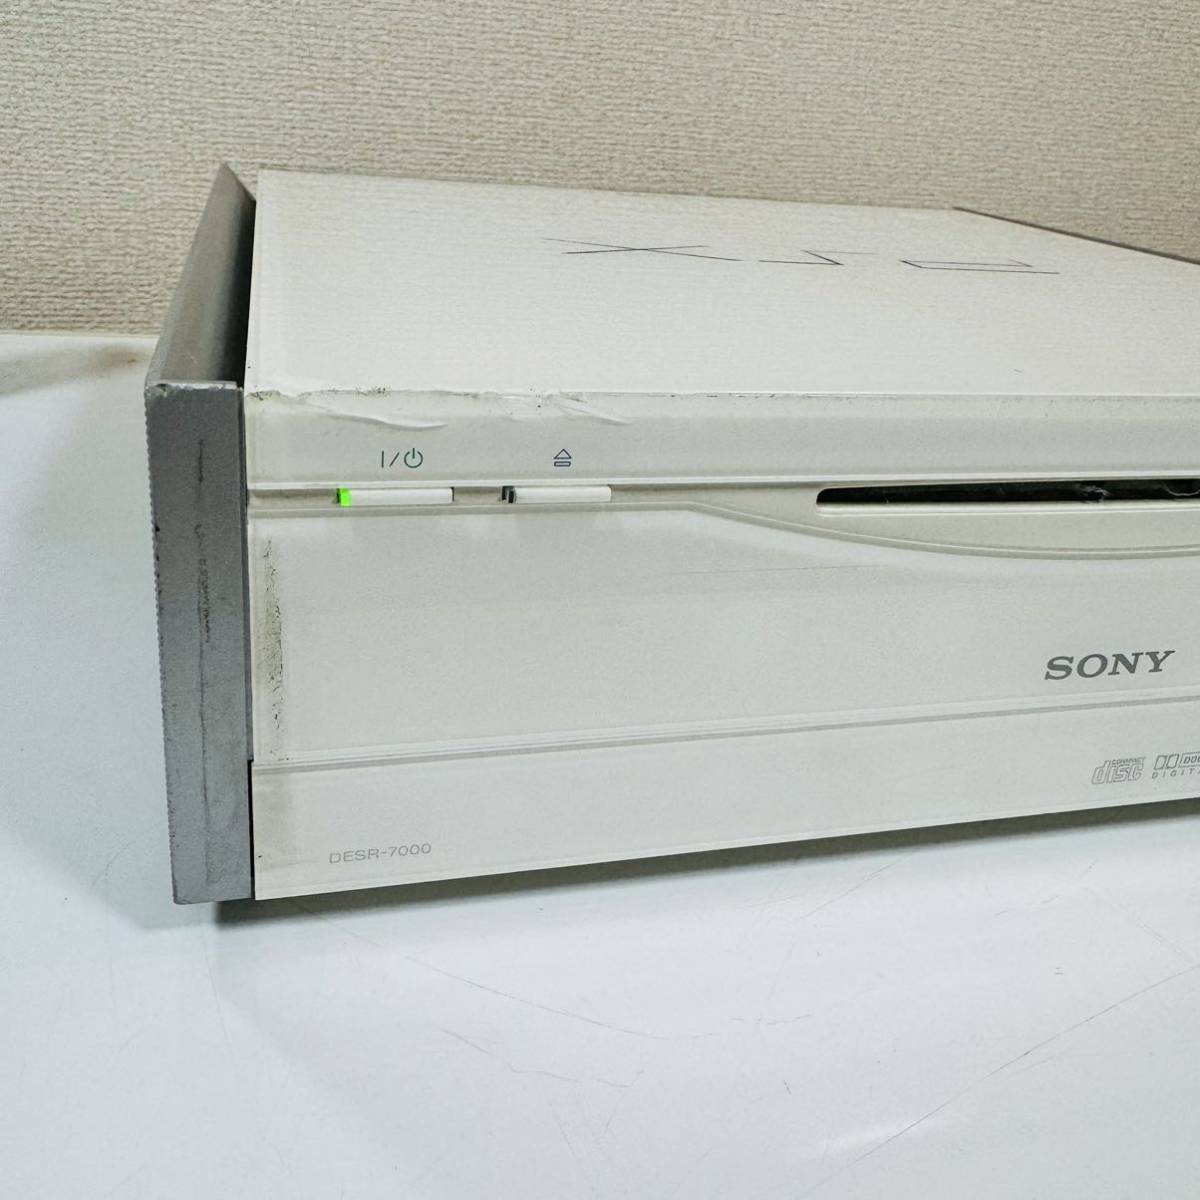 ◆SONY ソニー◆PlayStation2 PS2 PSX 本体 DVD RECORDER WITH HARD DISK DESR-7000 ホワイト/白 ジャンクの画像2